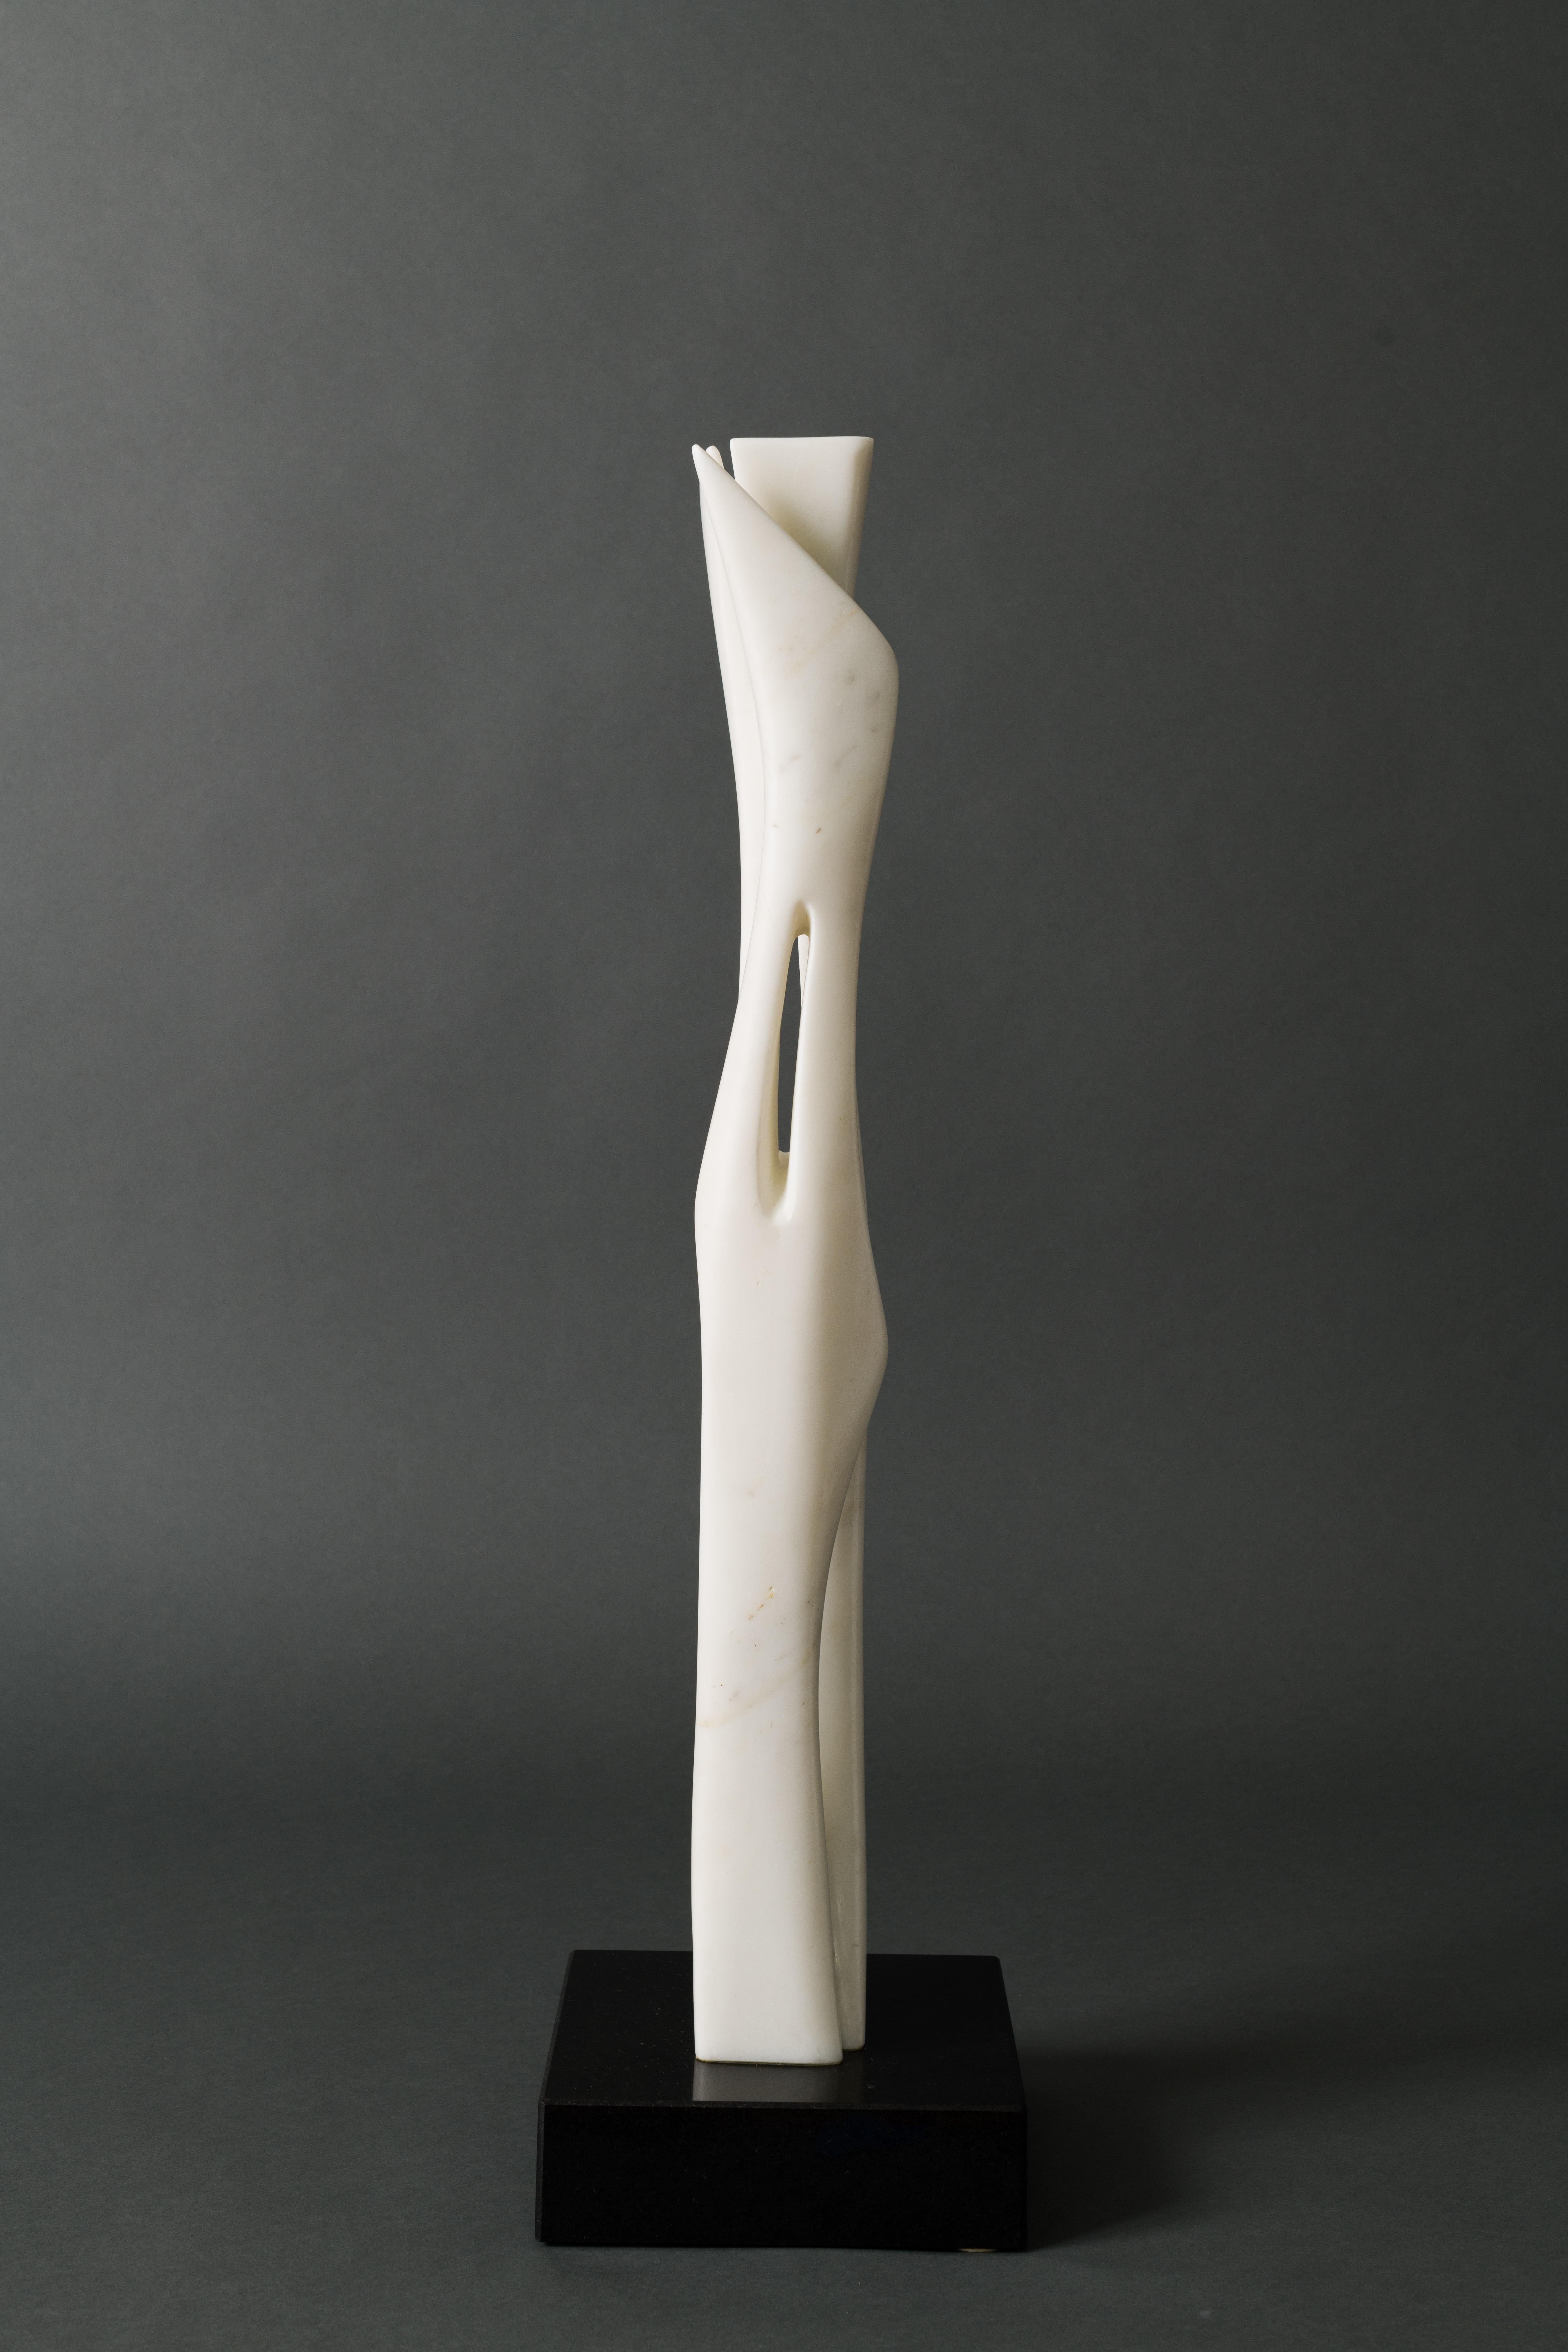 Carrara marble architectural carved Atchugarry sculpture - Sculpture by Pablo Atchugarry